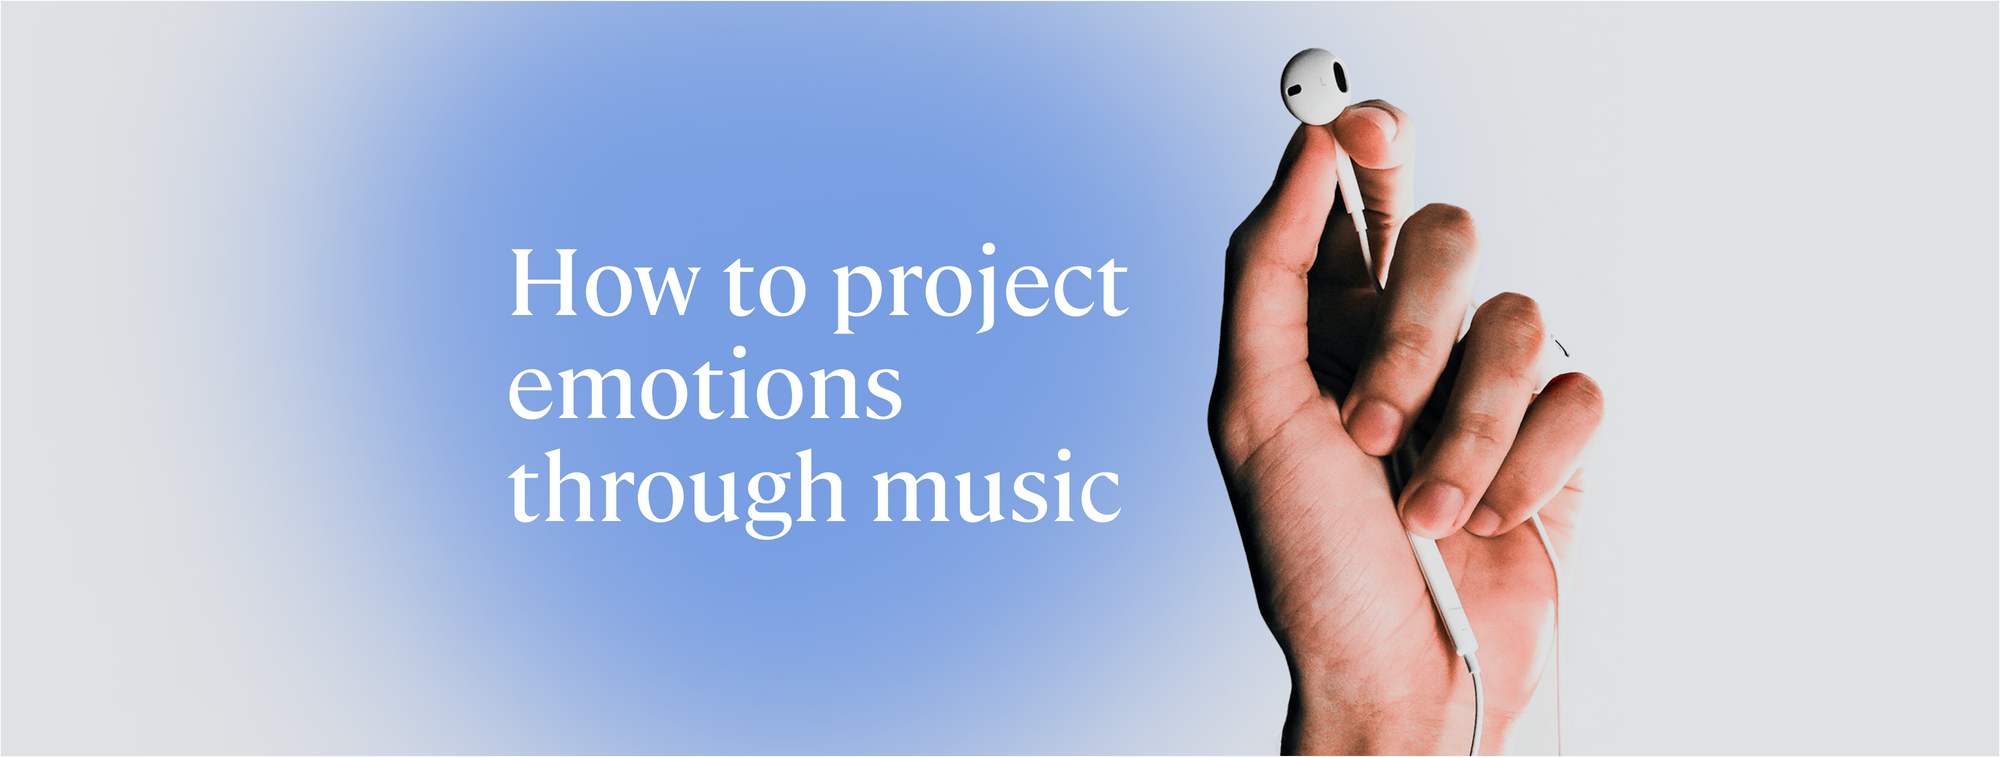 Music, a catalyst for emotions